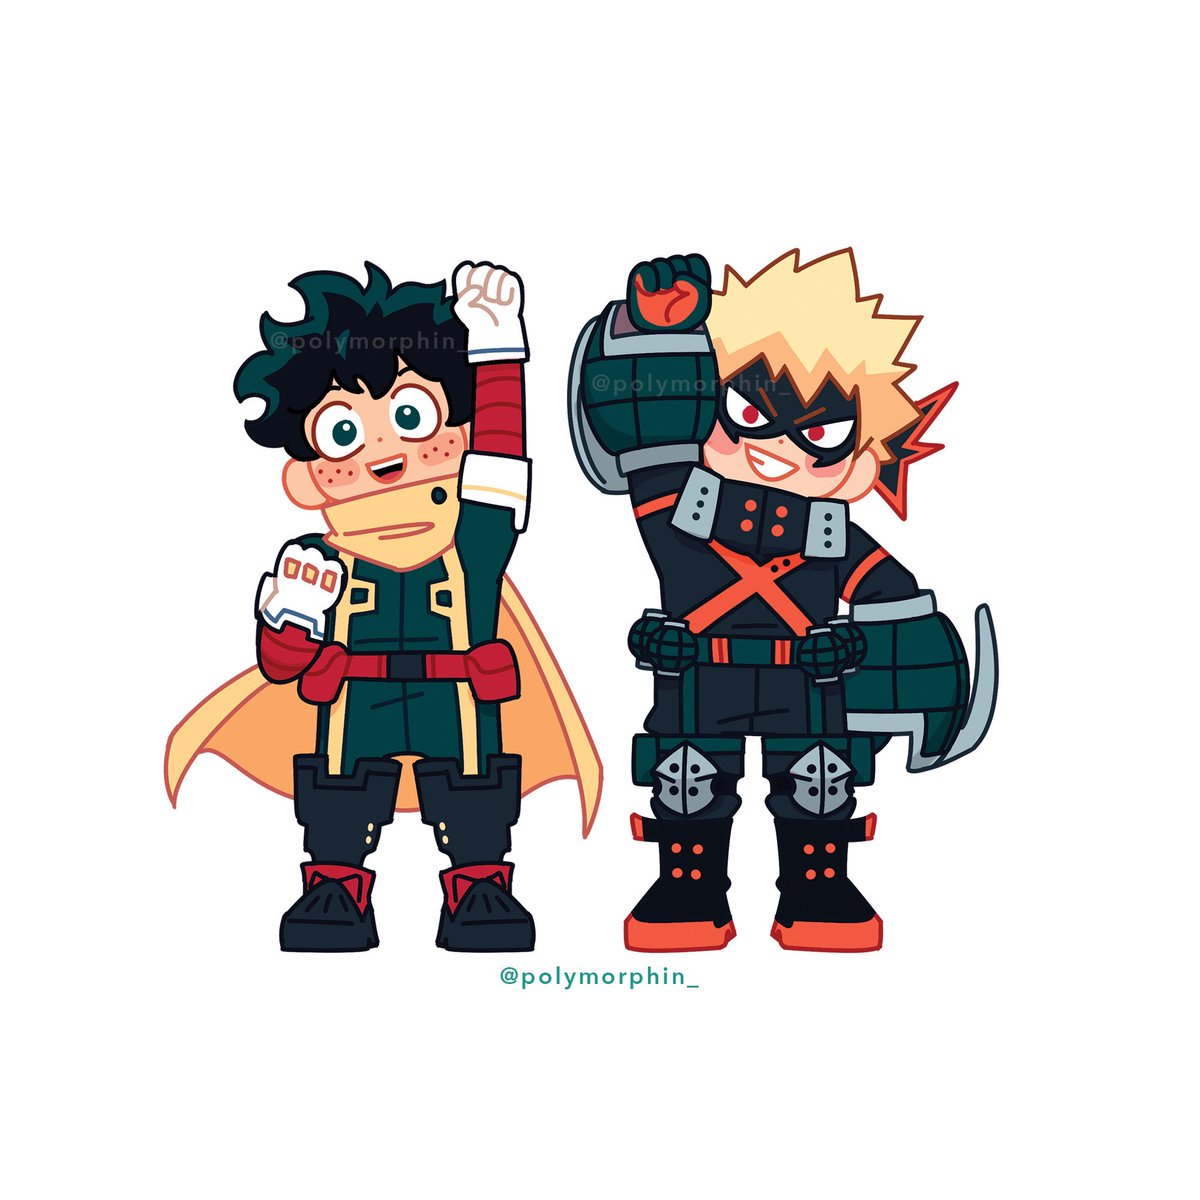 thank you for all the love on these lil guys! PO’s close tomorrow 💌💚🧡 #bkdk #bakudeku #mha #bnha